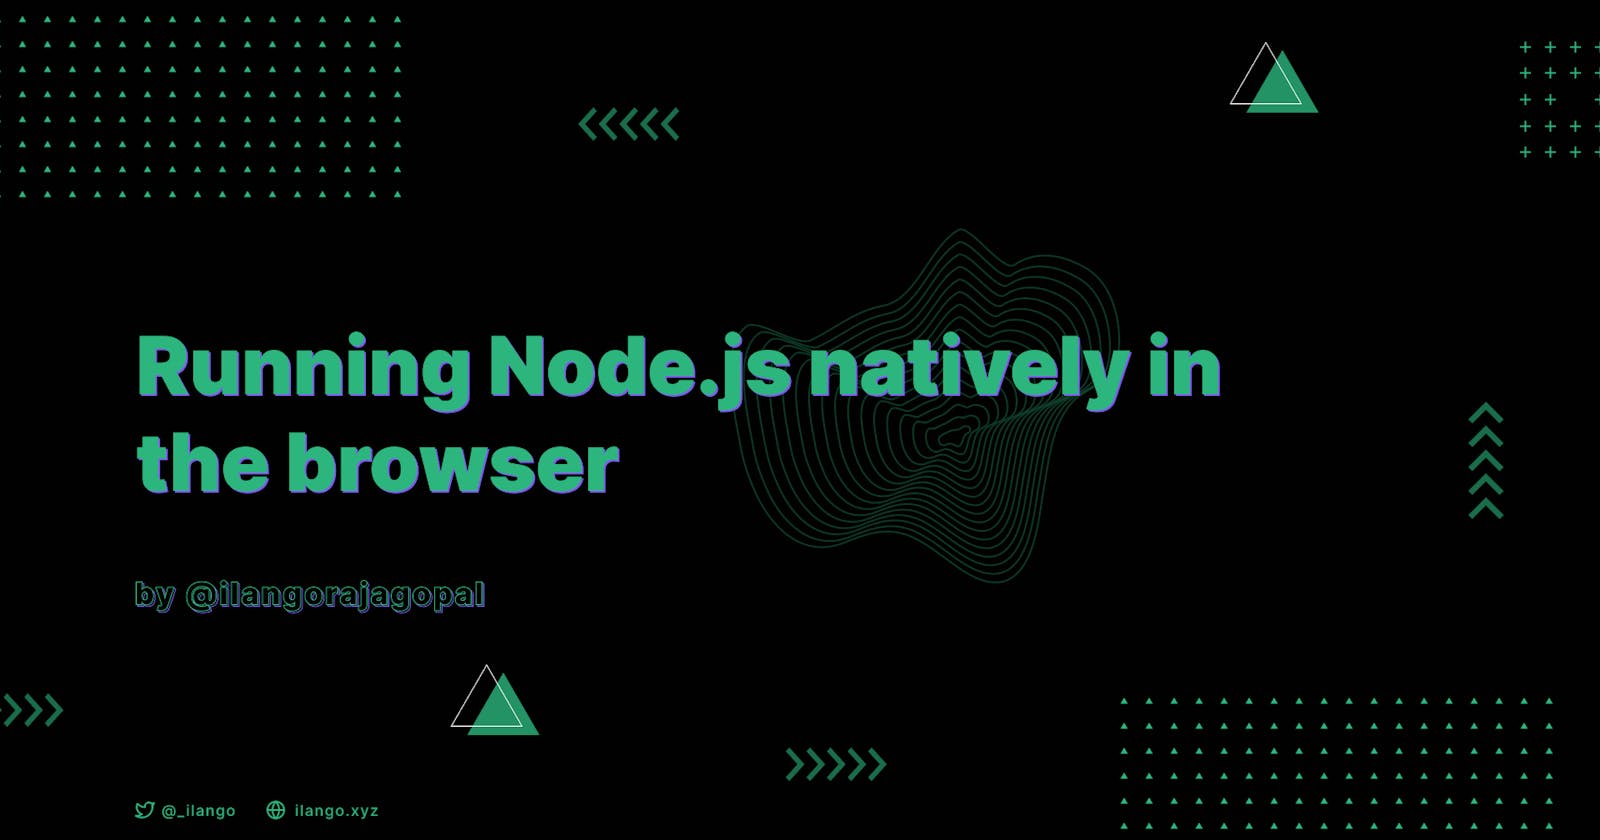 Running Node.js natively in the browser